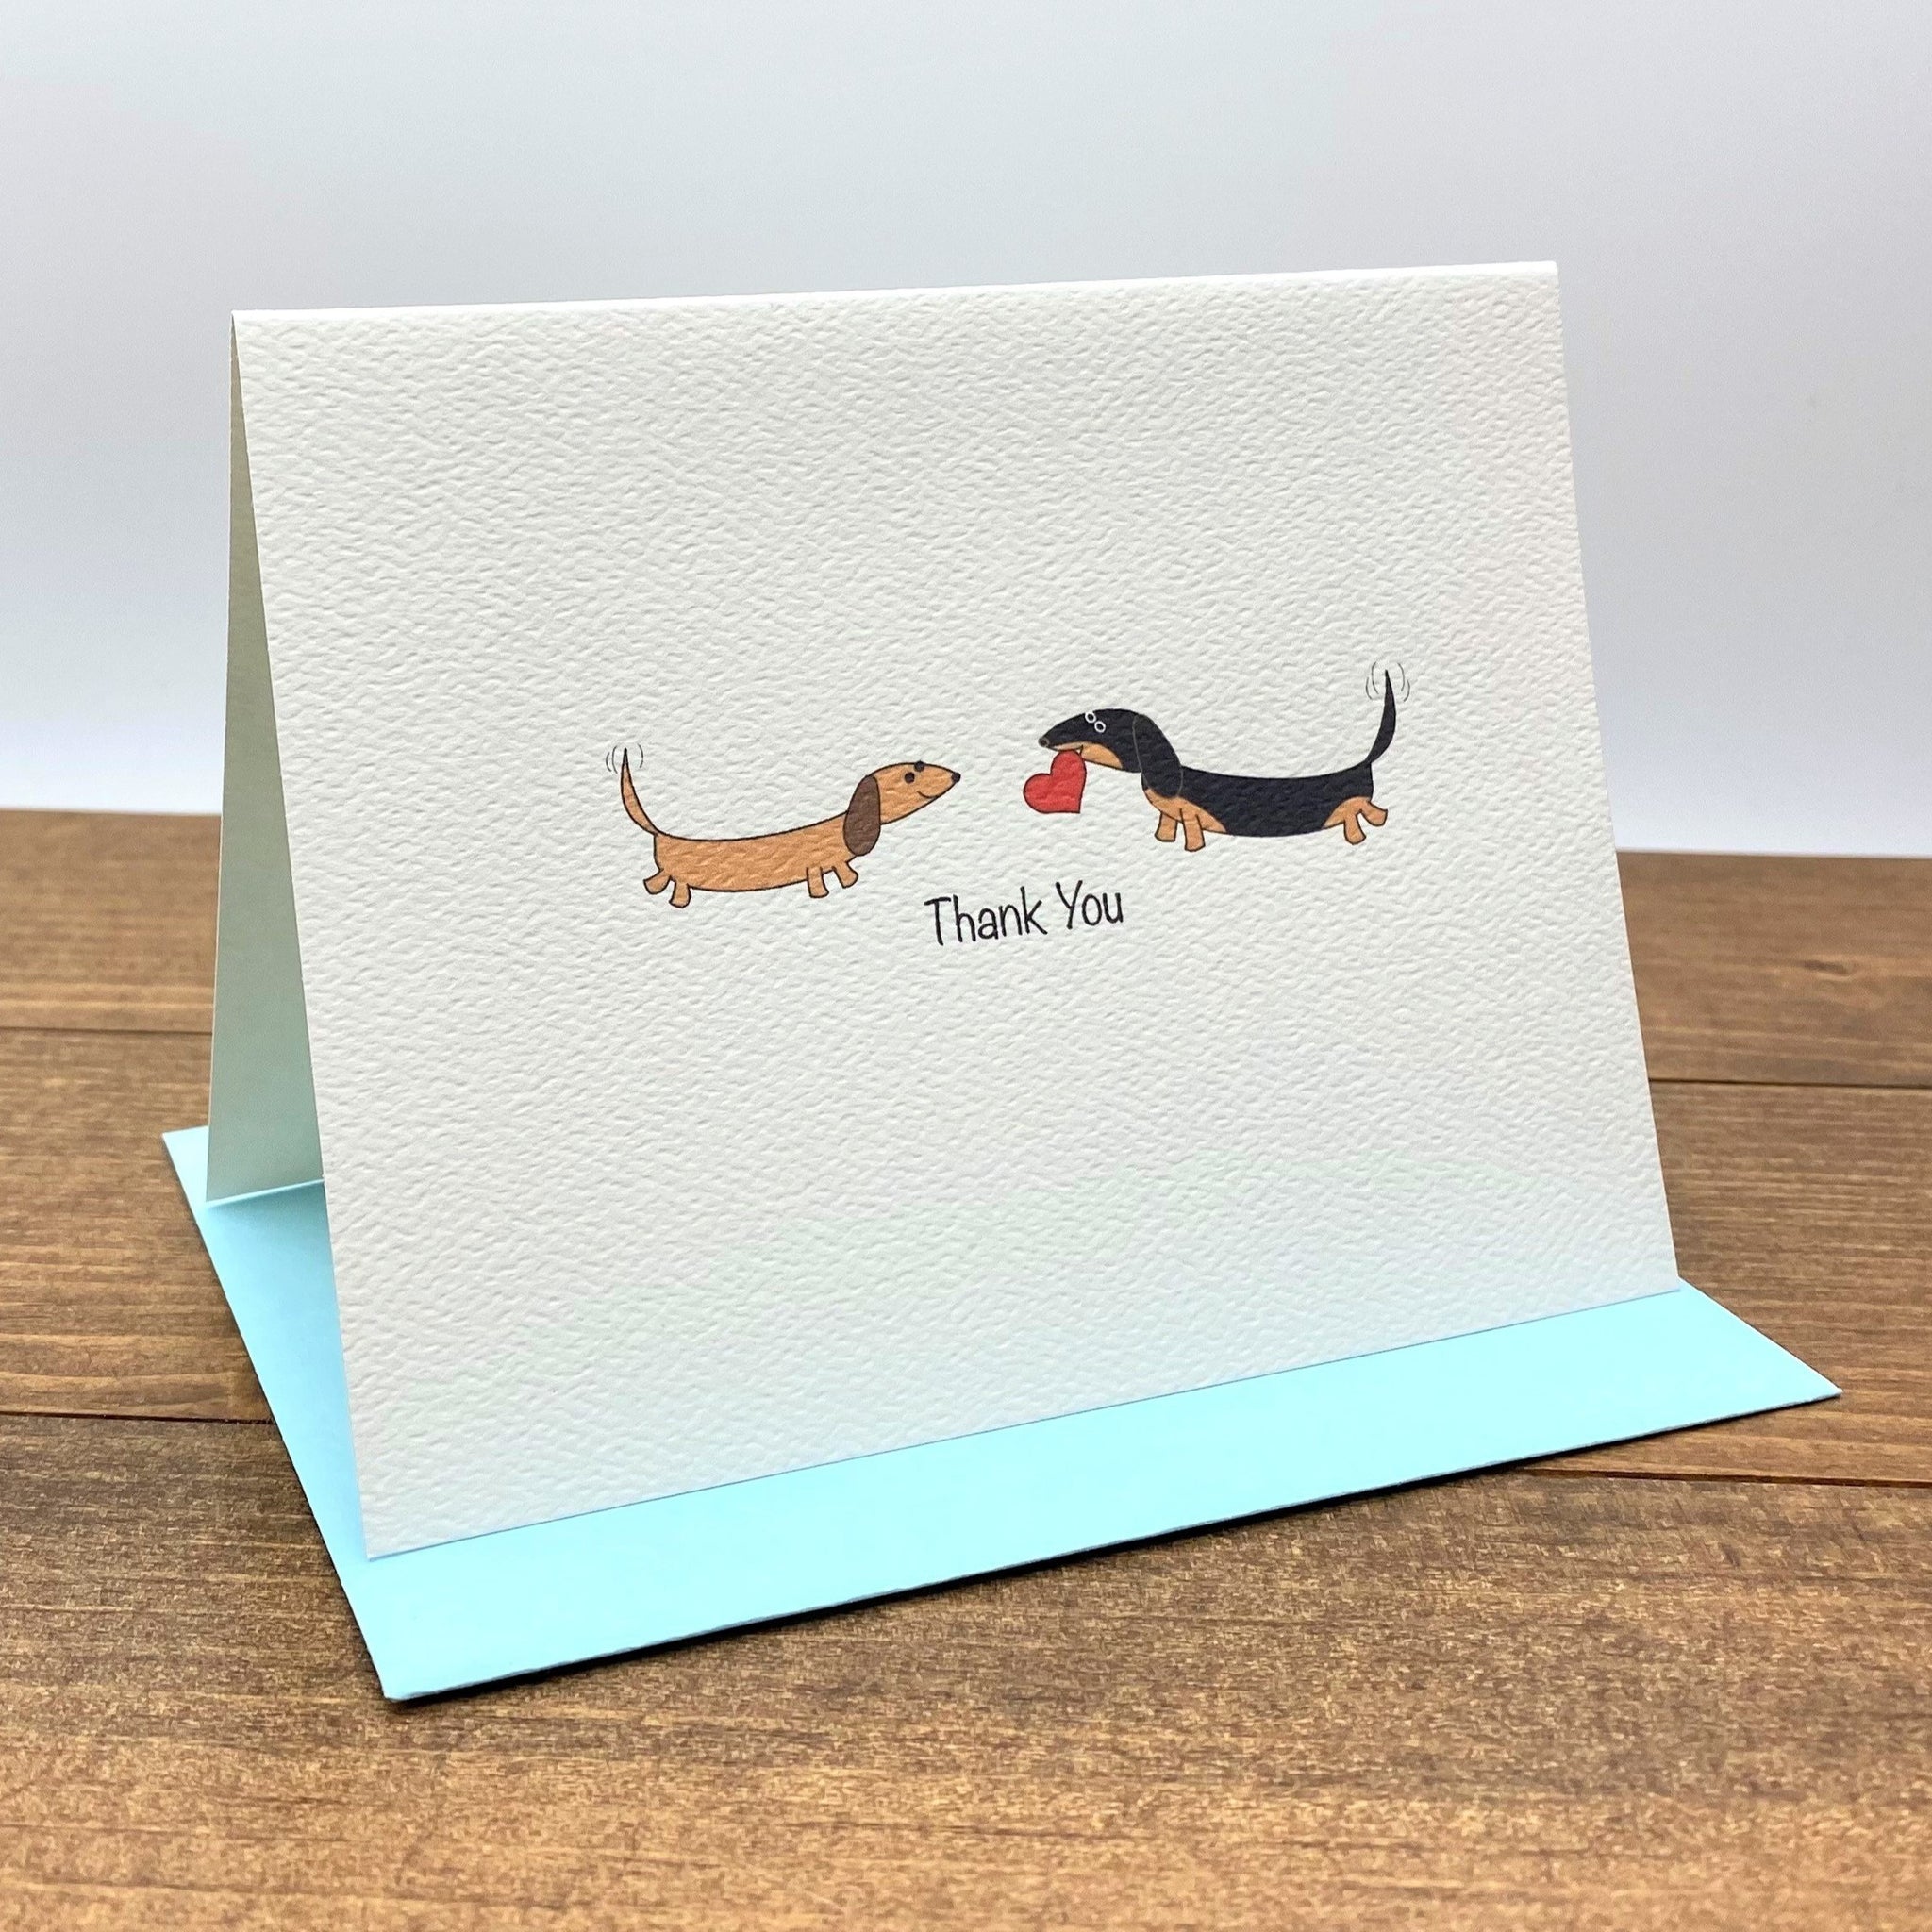 On the textured folded note card there are two dachshunds facing each other, one is brown and the other one is black and tan and holding a heart in its mouth.